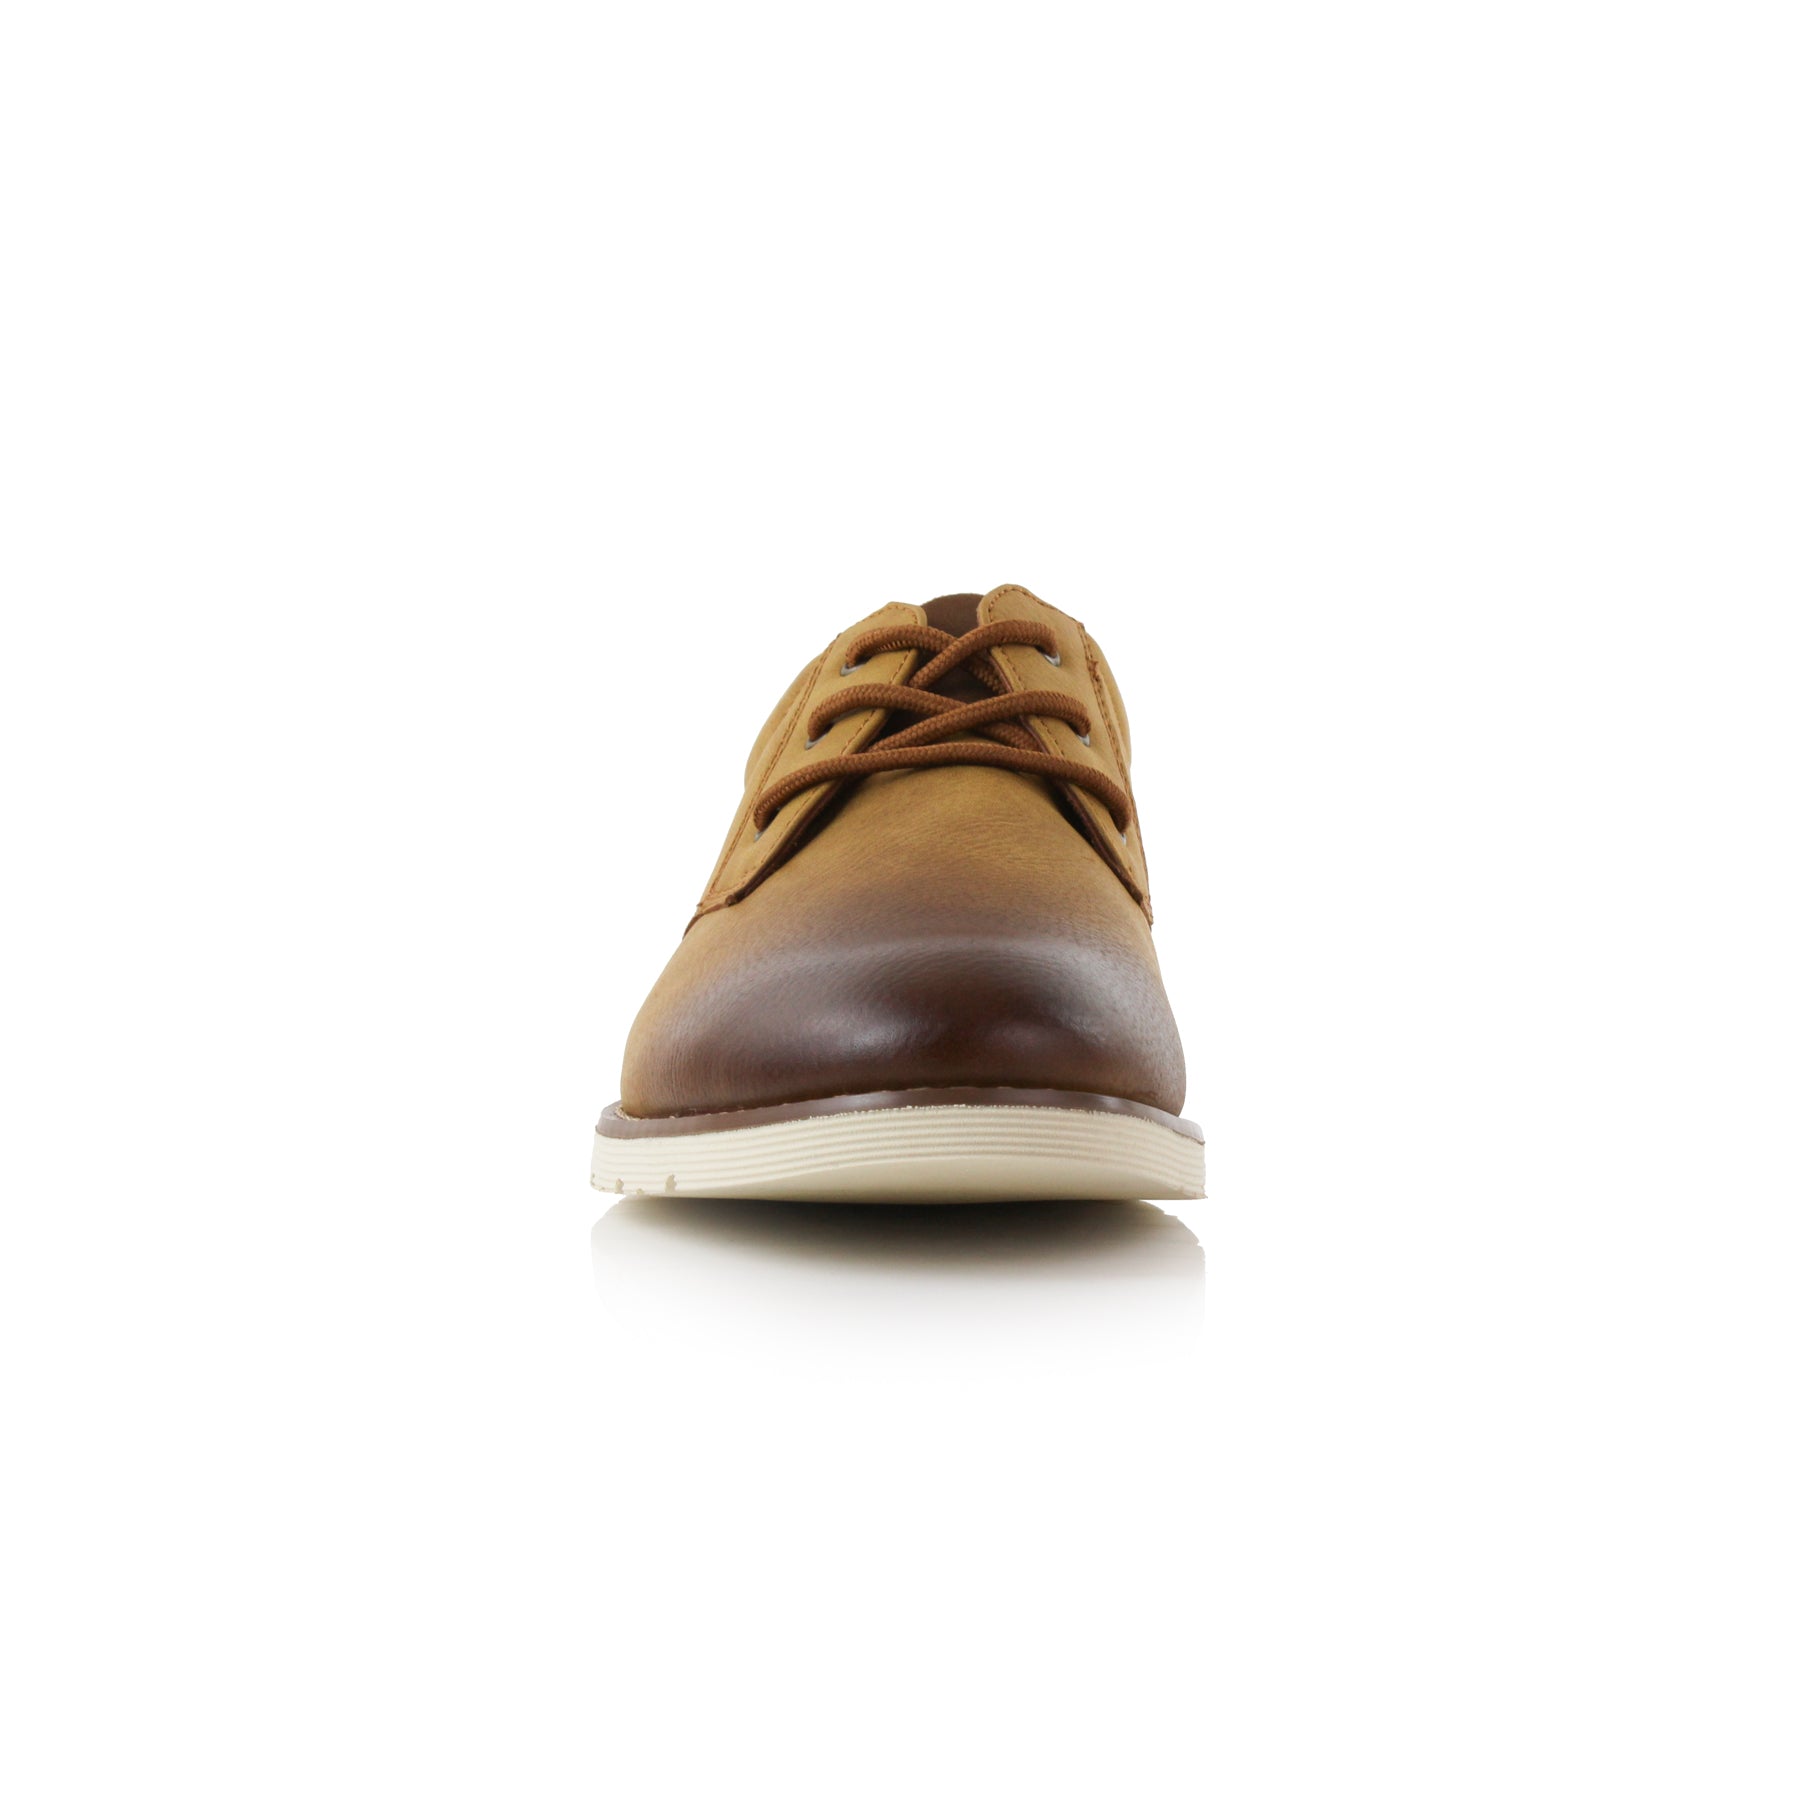 Grained Leather Sneakers | Ayden by Ferro Aldo | Conal Footwear | Front Angle View